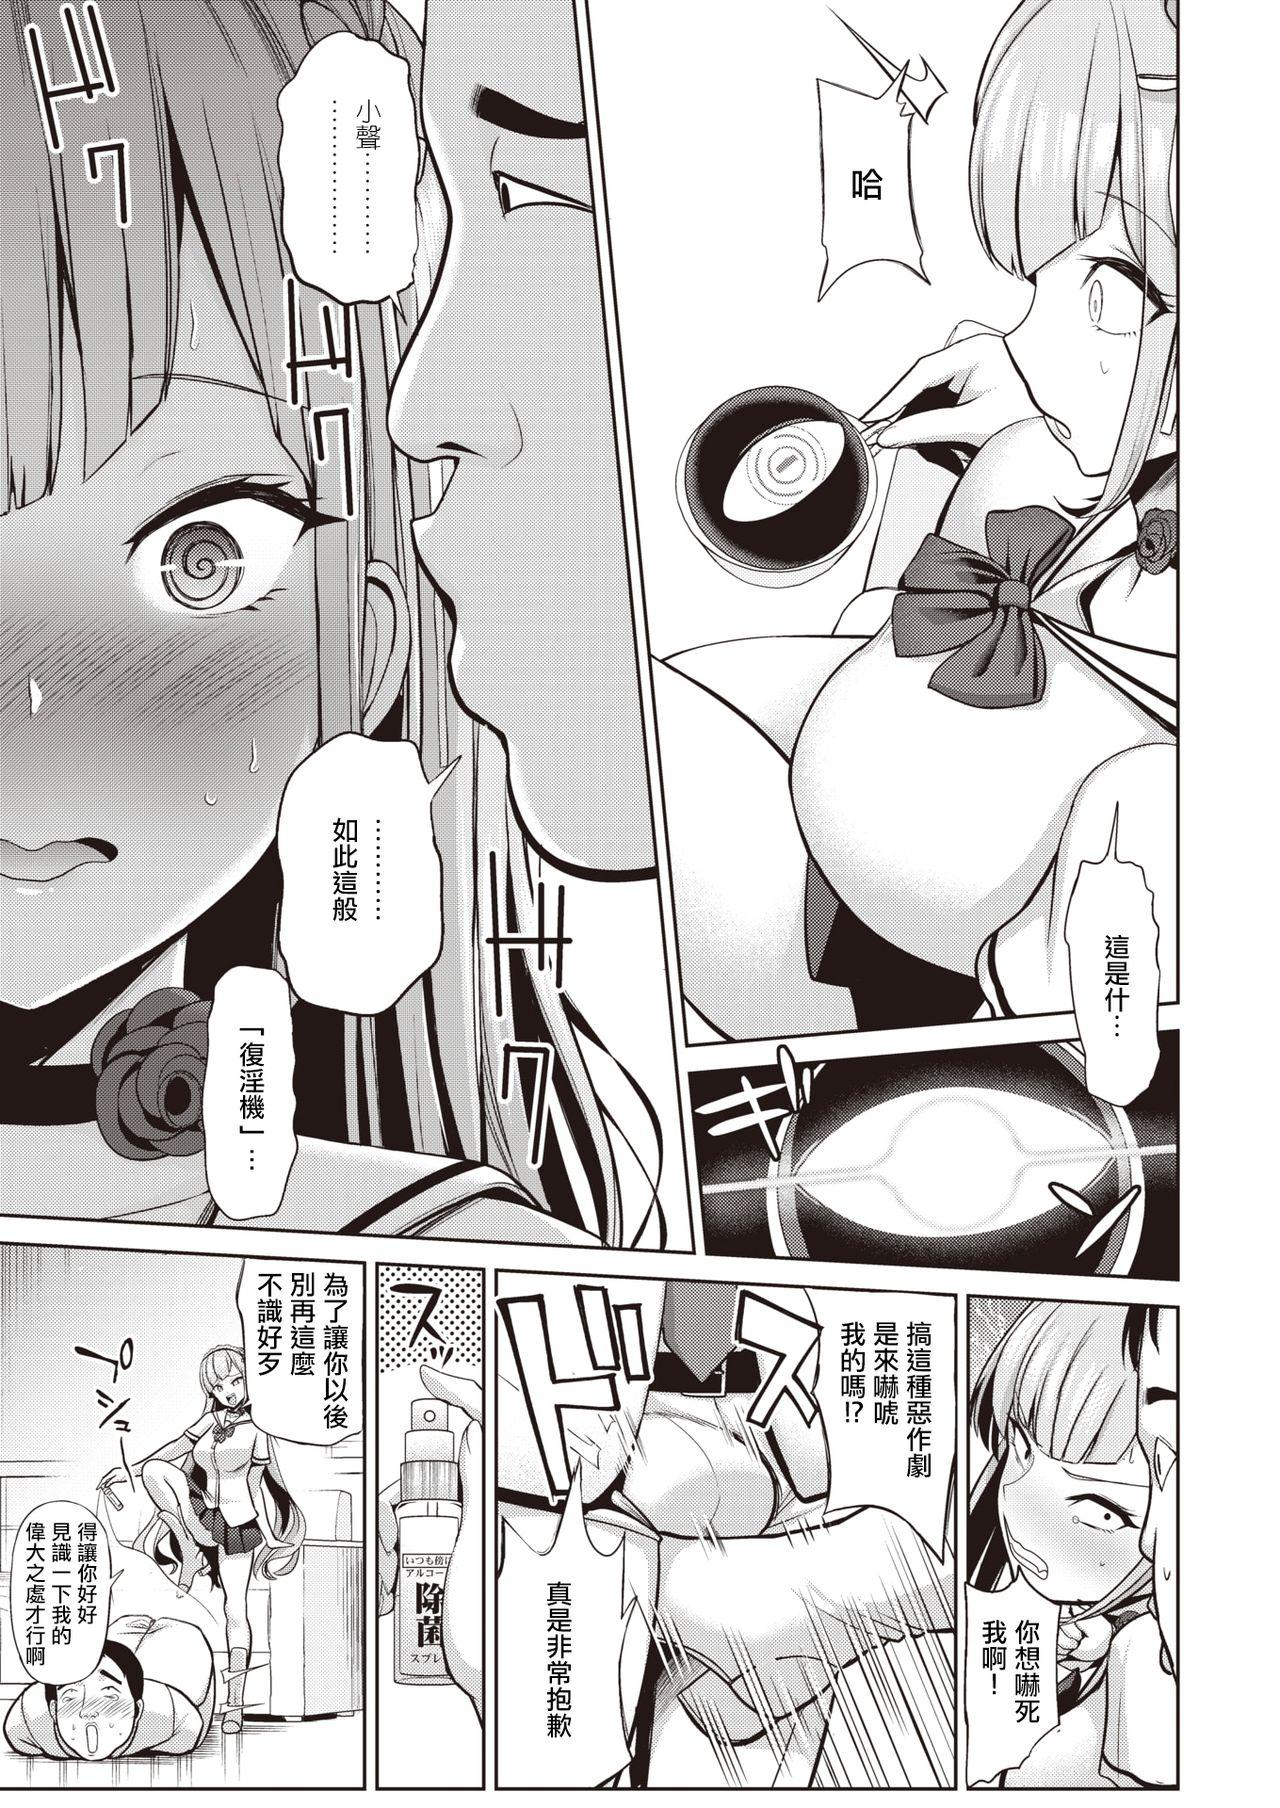 Cameltoe Hypnosis Quest#04 | 催眠探索#04 Buttplug - Page 6